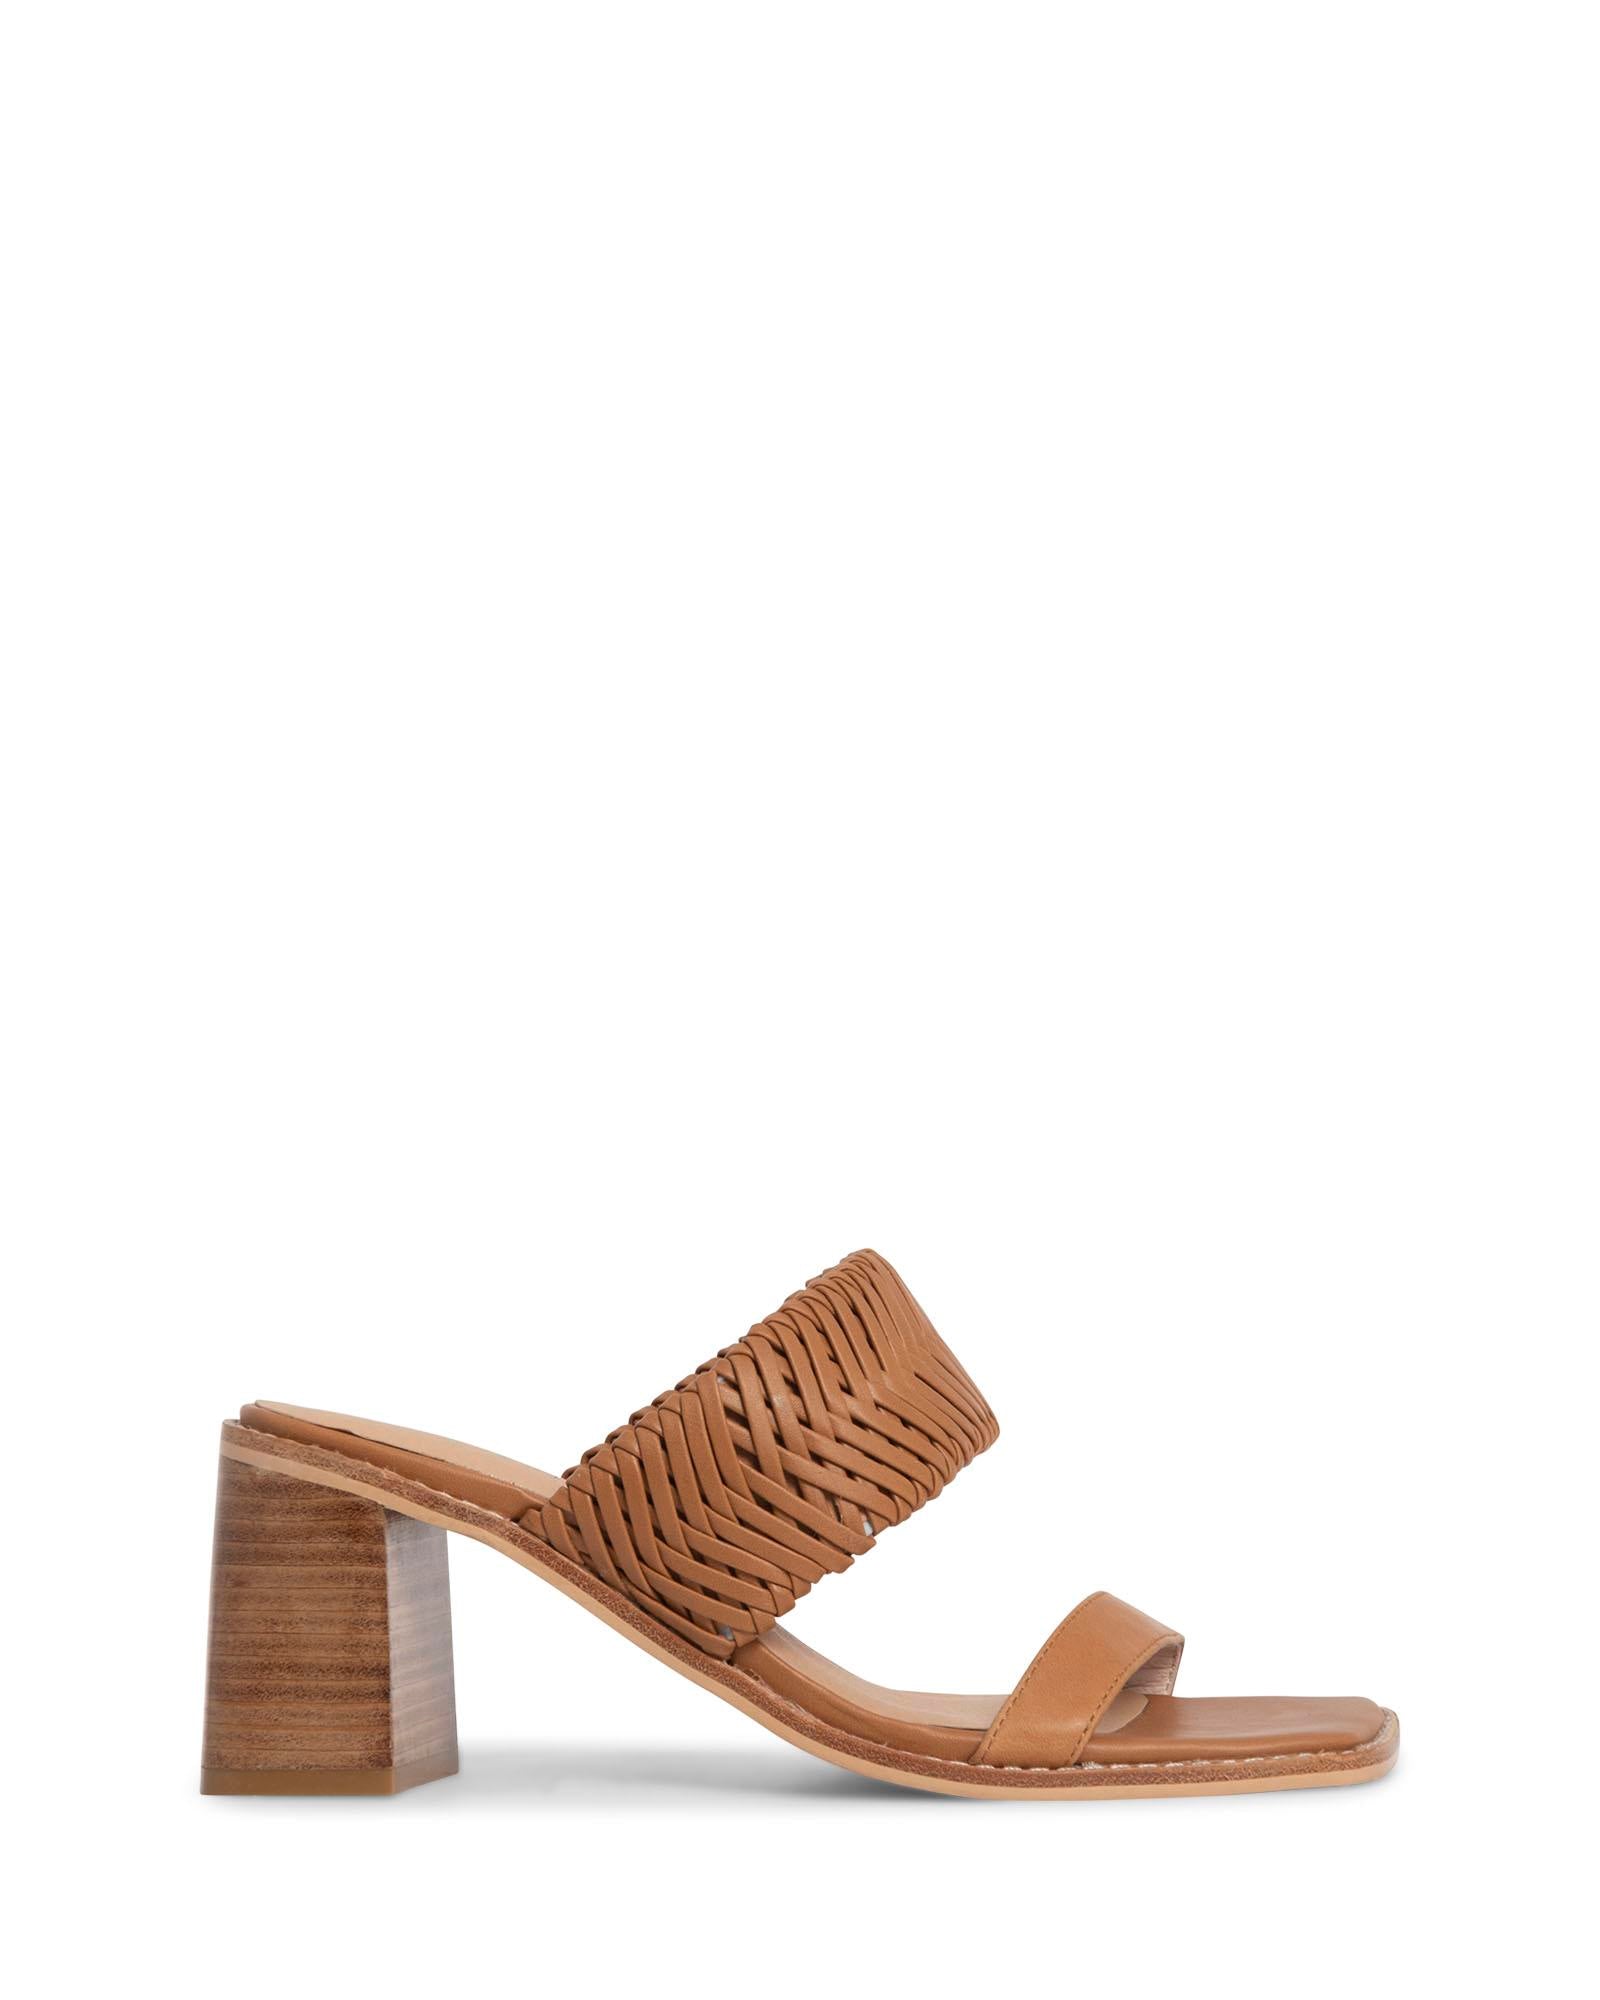 Nimah Tan 7cm Block Heel with Woven Leather Strap 